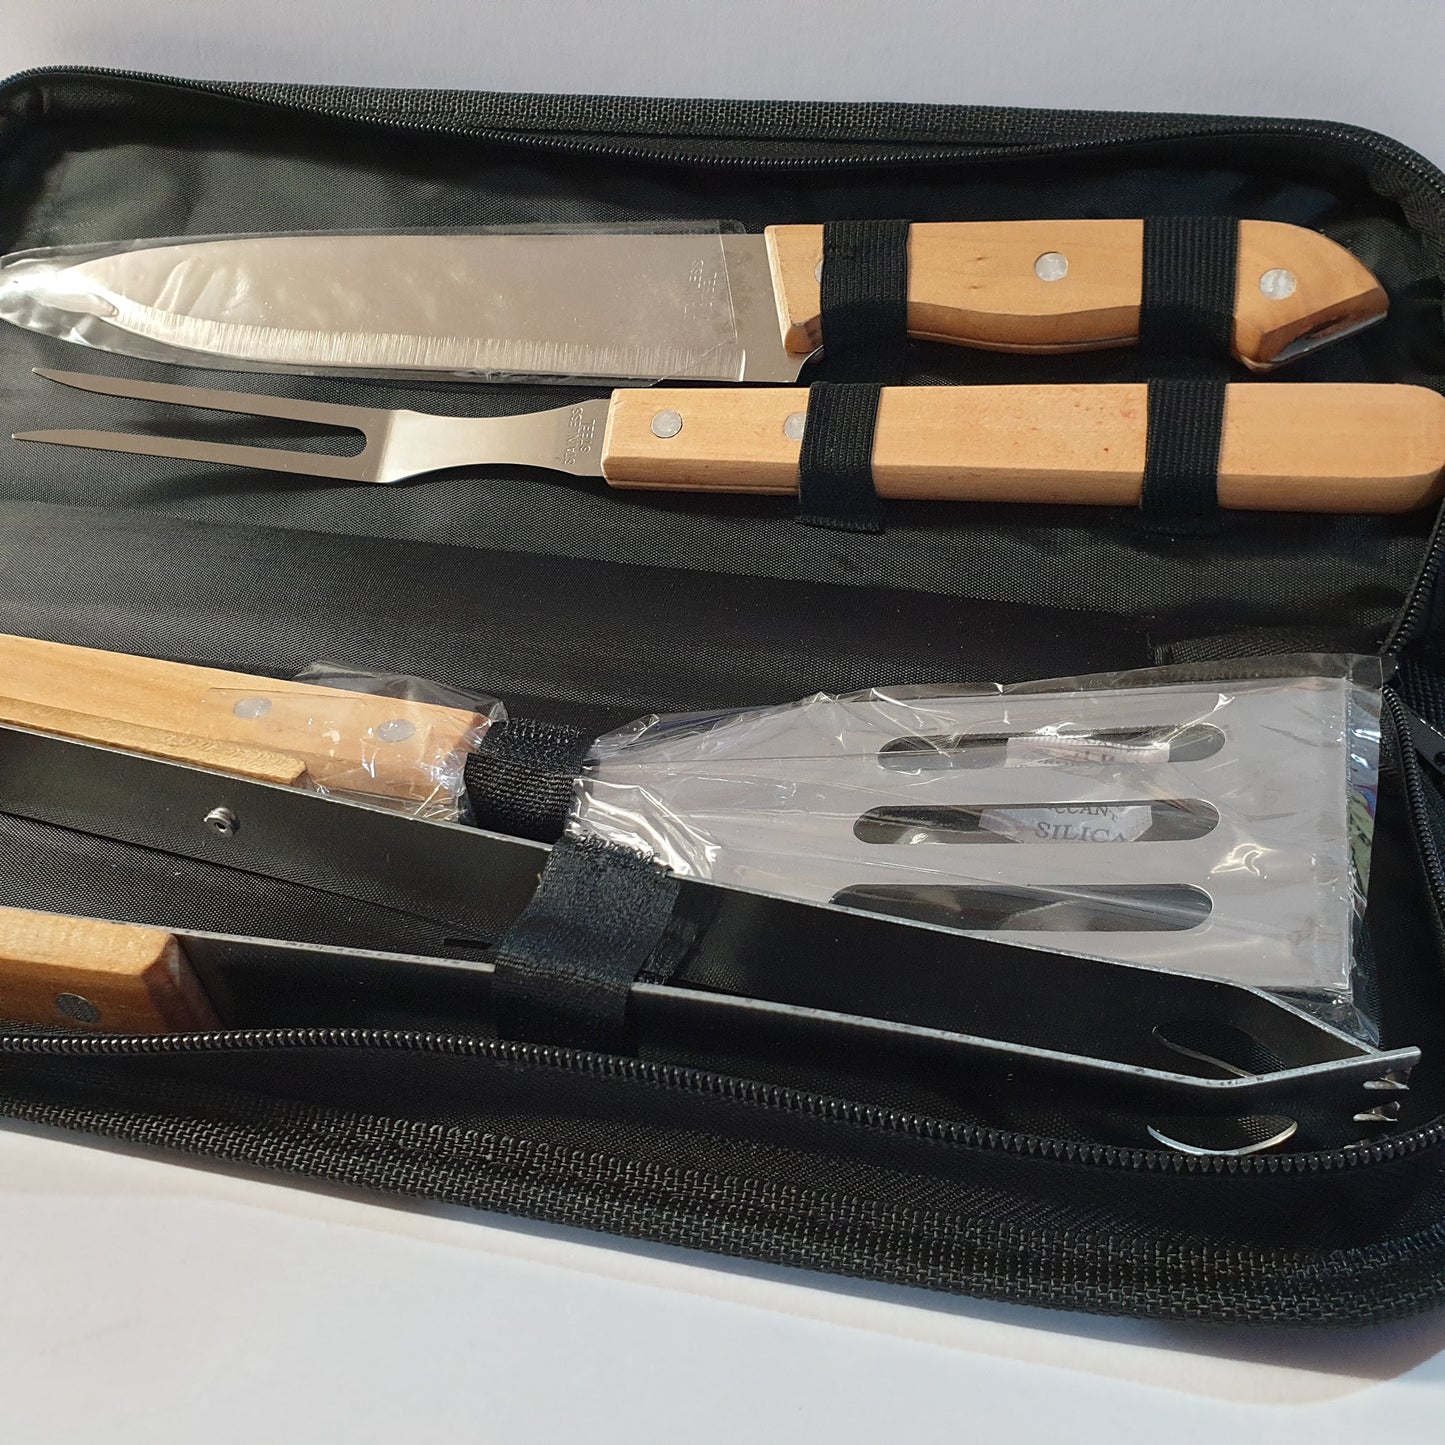 BBQ Utensil  5 Pc Tool Kit in carry case Camping Garden Cooking Tools